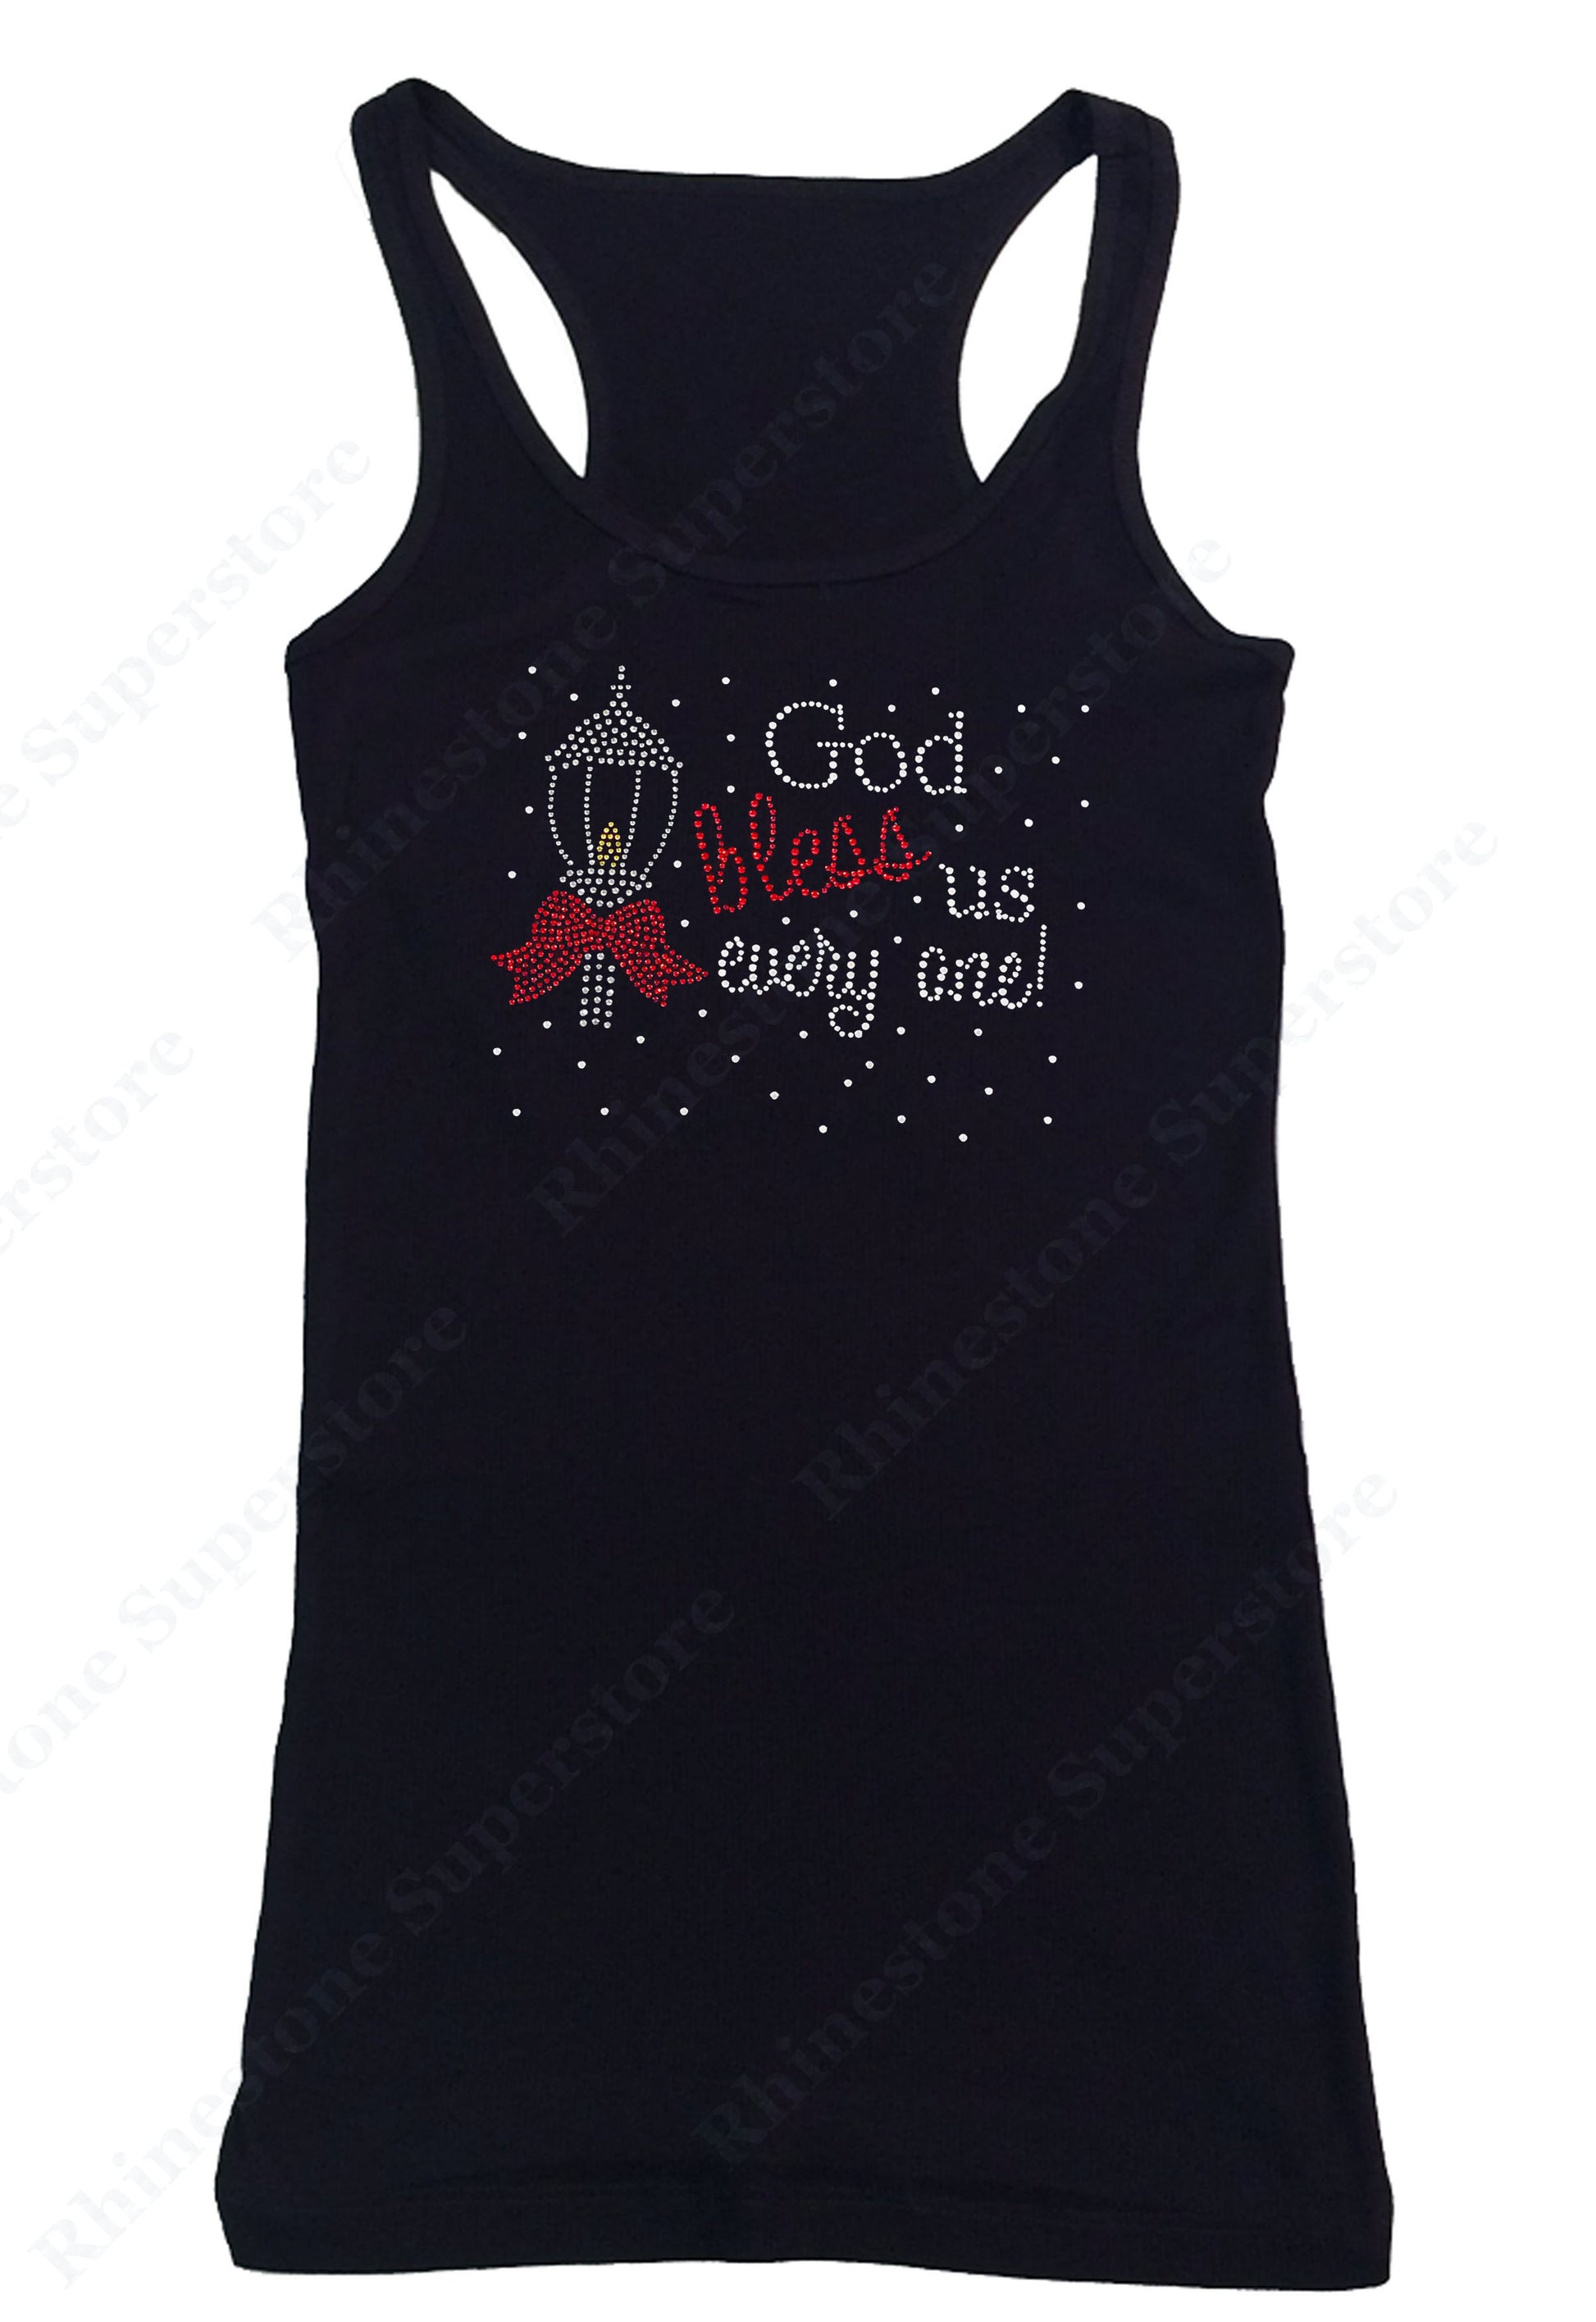 God bless us every one! Christmas Design tank top